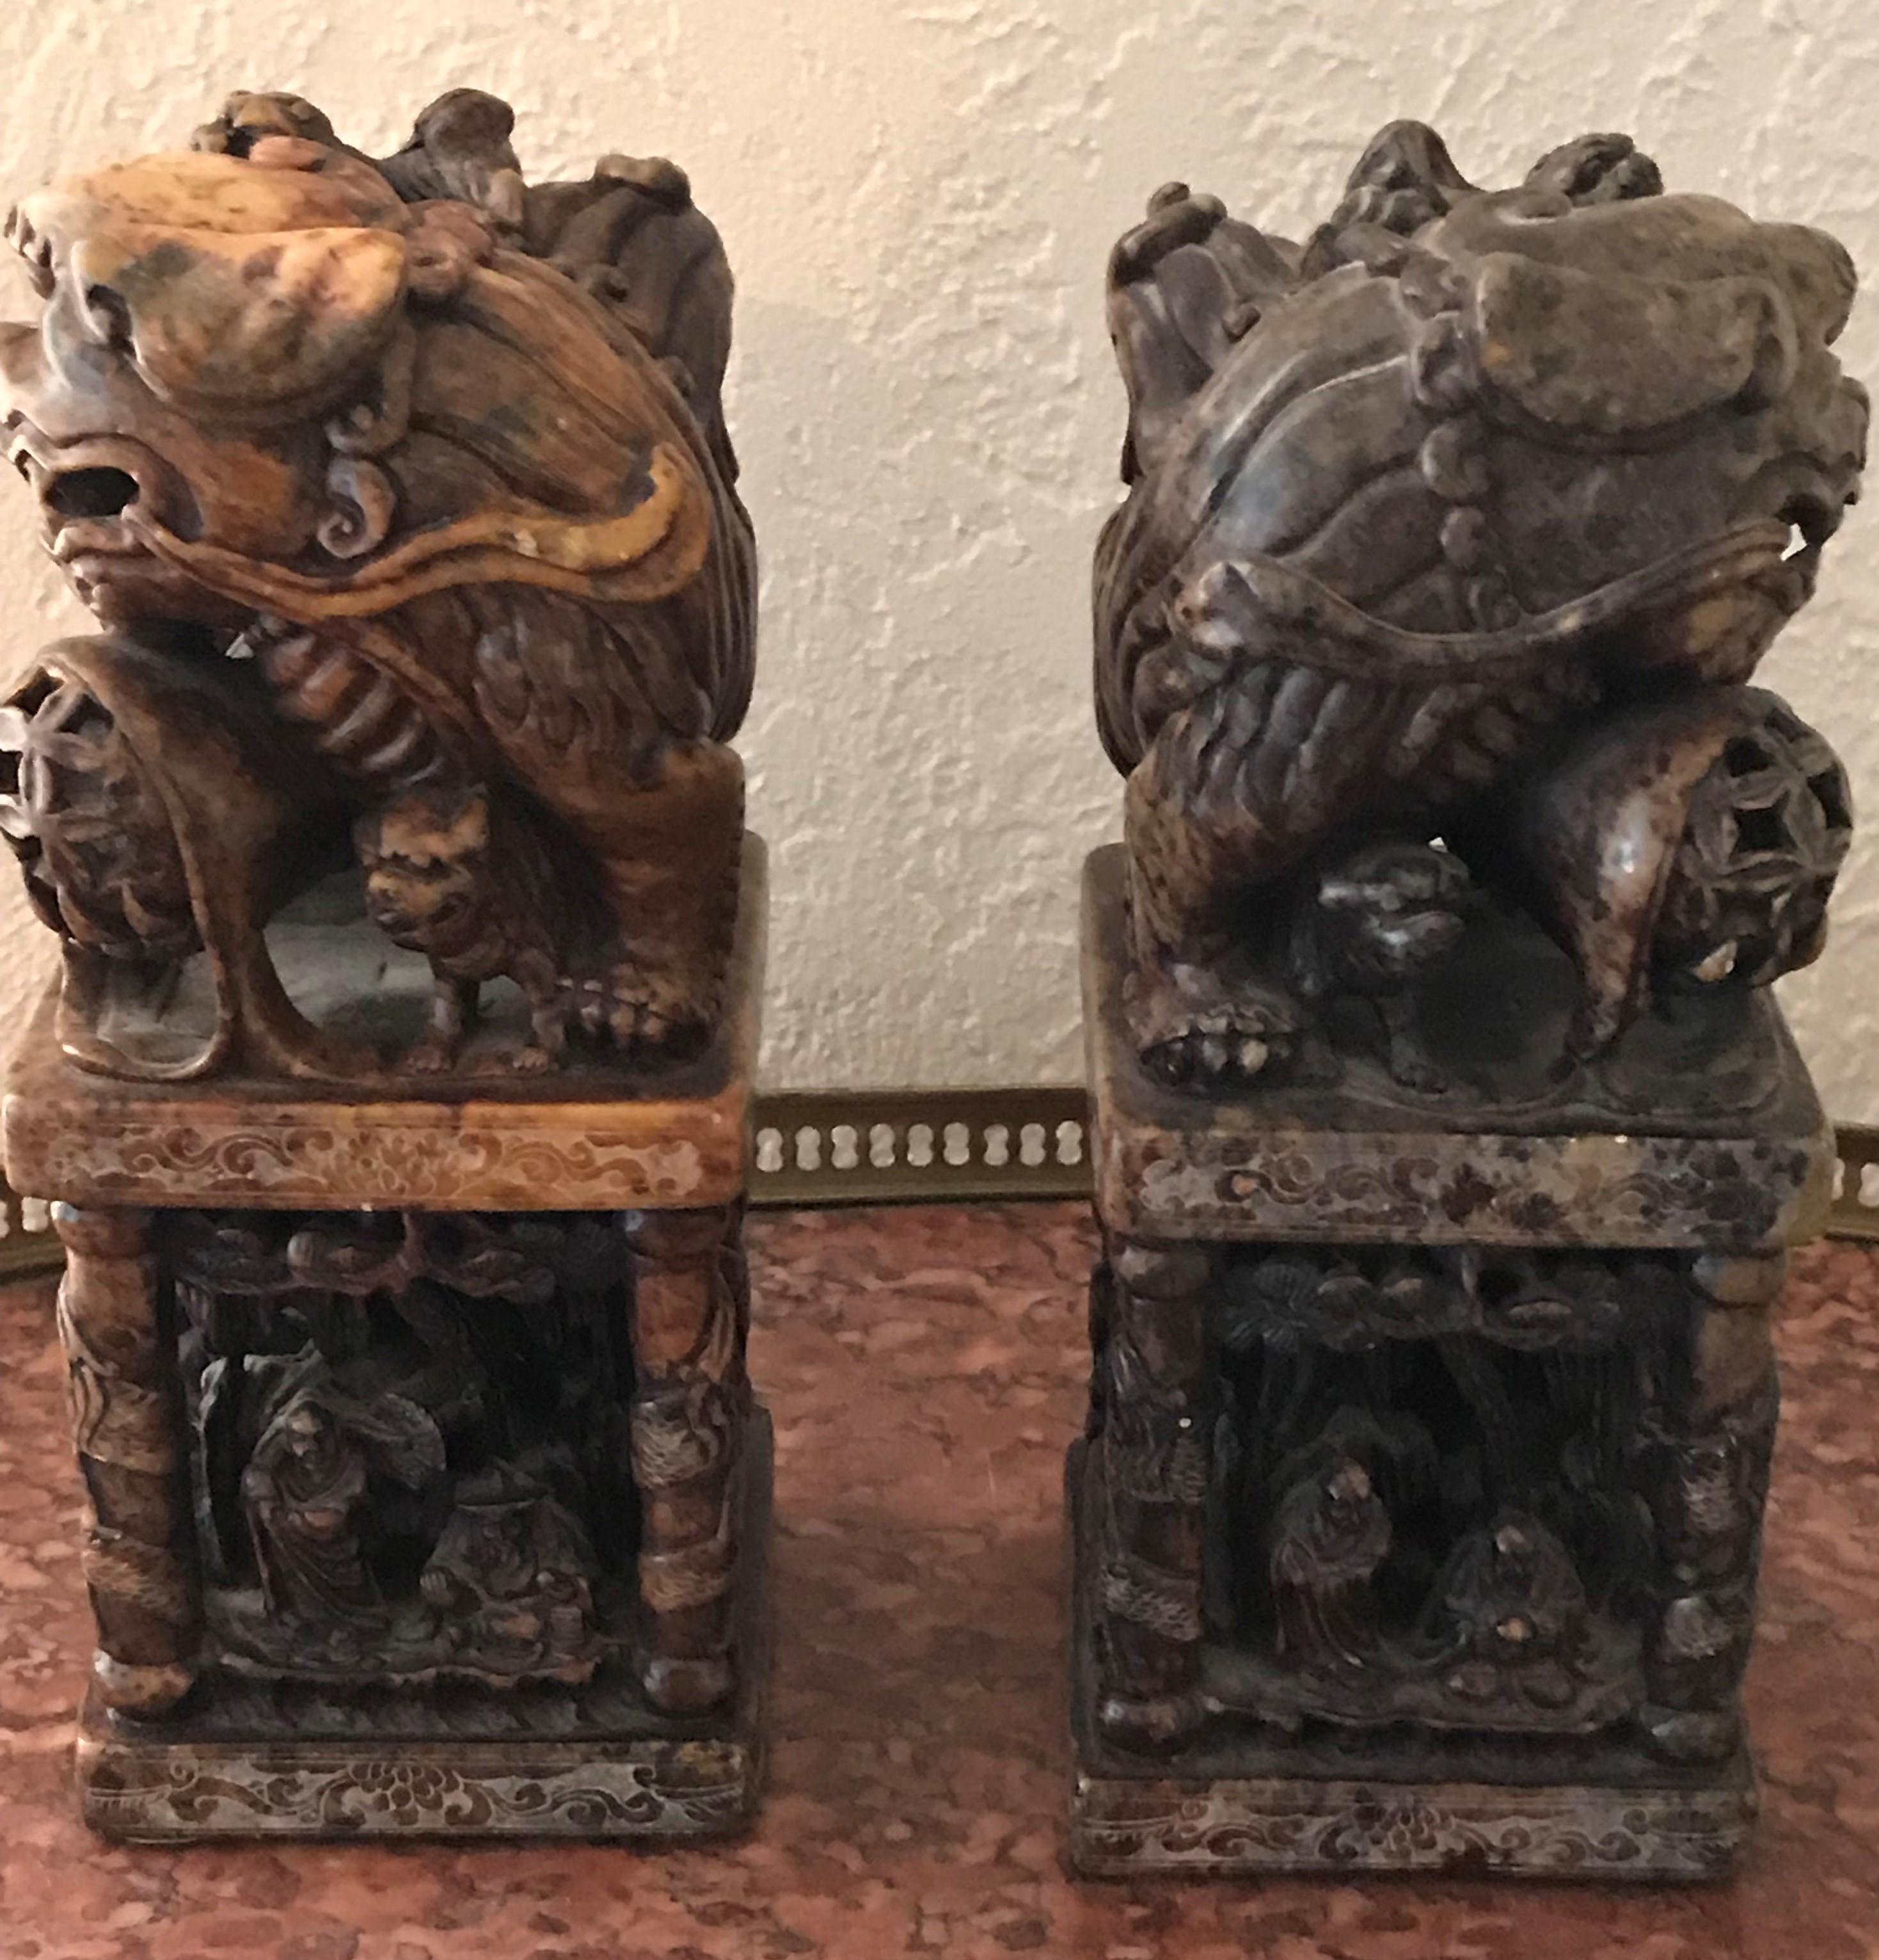 Pair of foo dog seal chops. Chinese hardstone carved with Buddhist monks in forest scene in base, circa 1900.

9